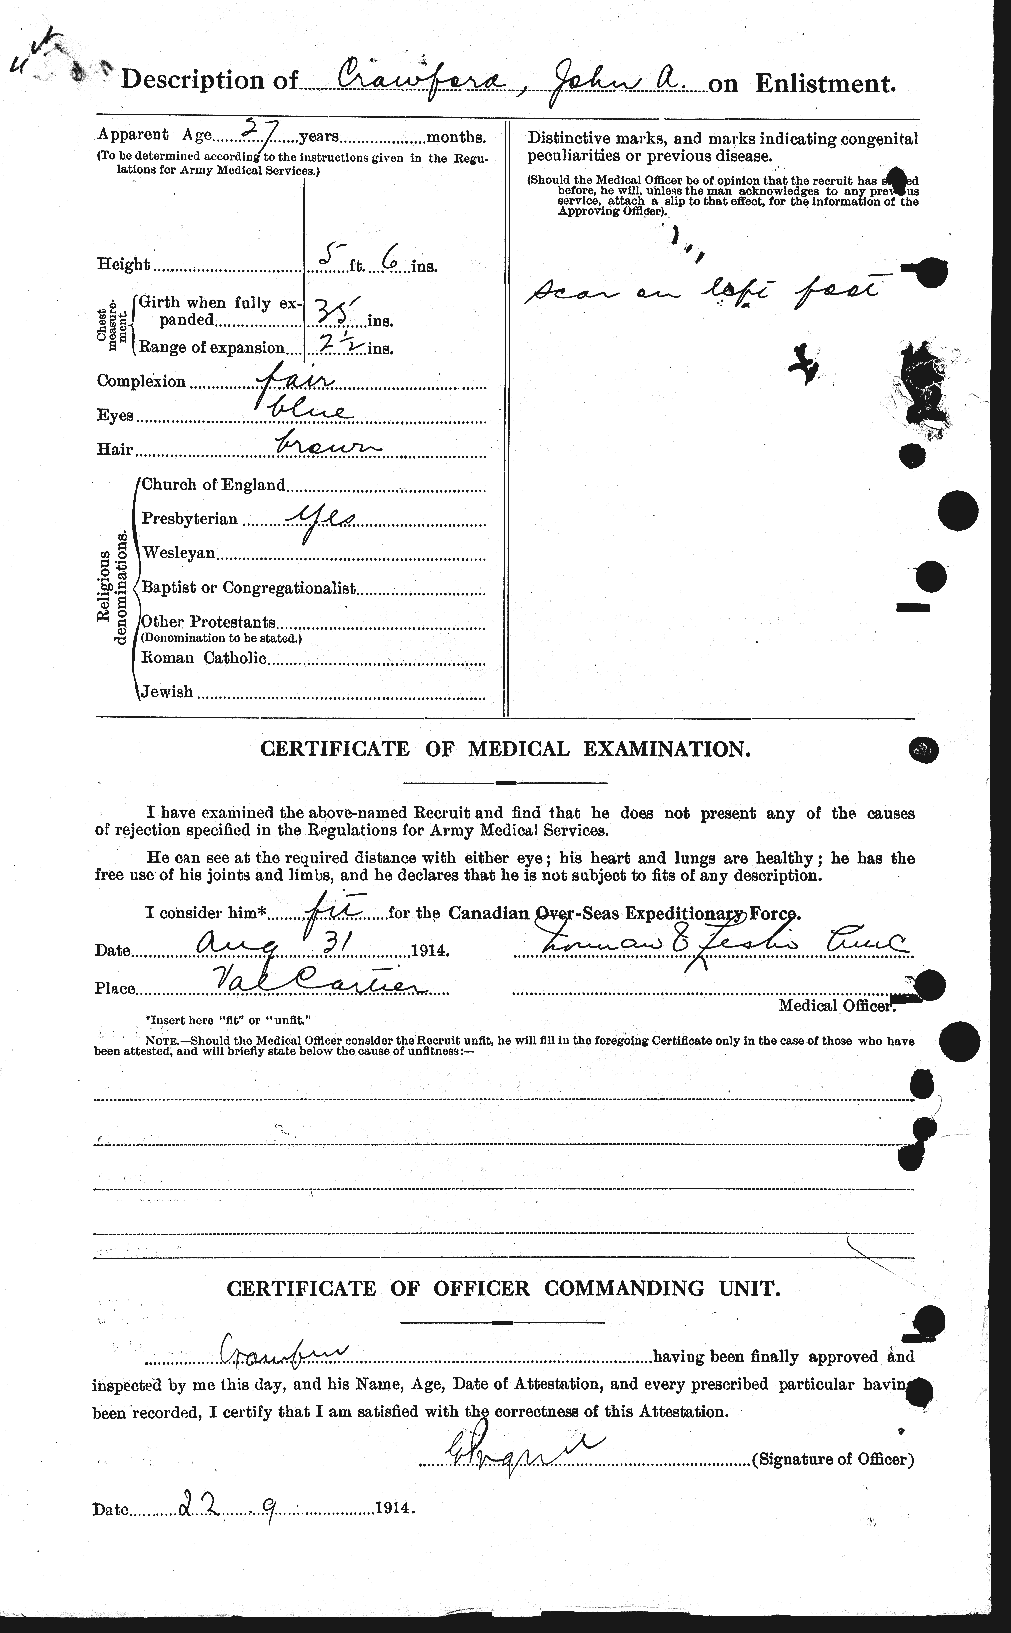 Personnel Records of the First World War - CEF 062435b